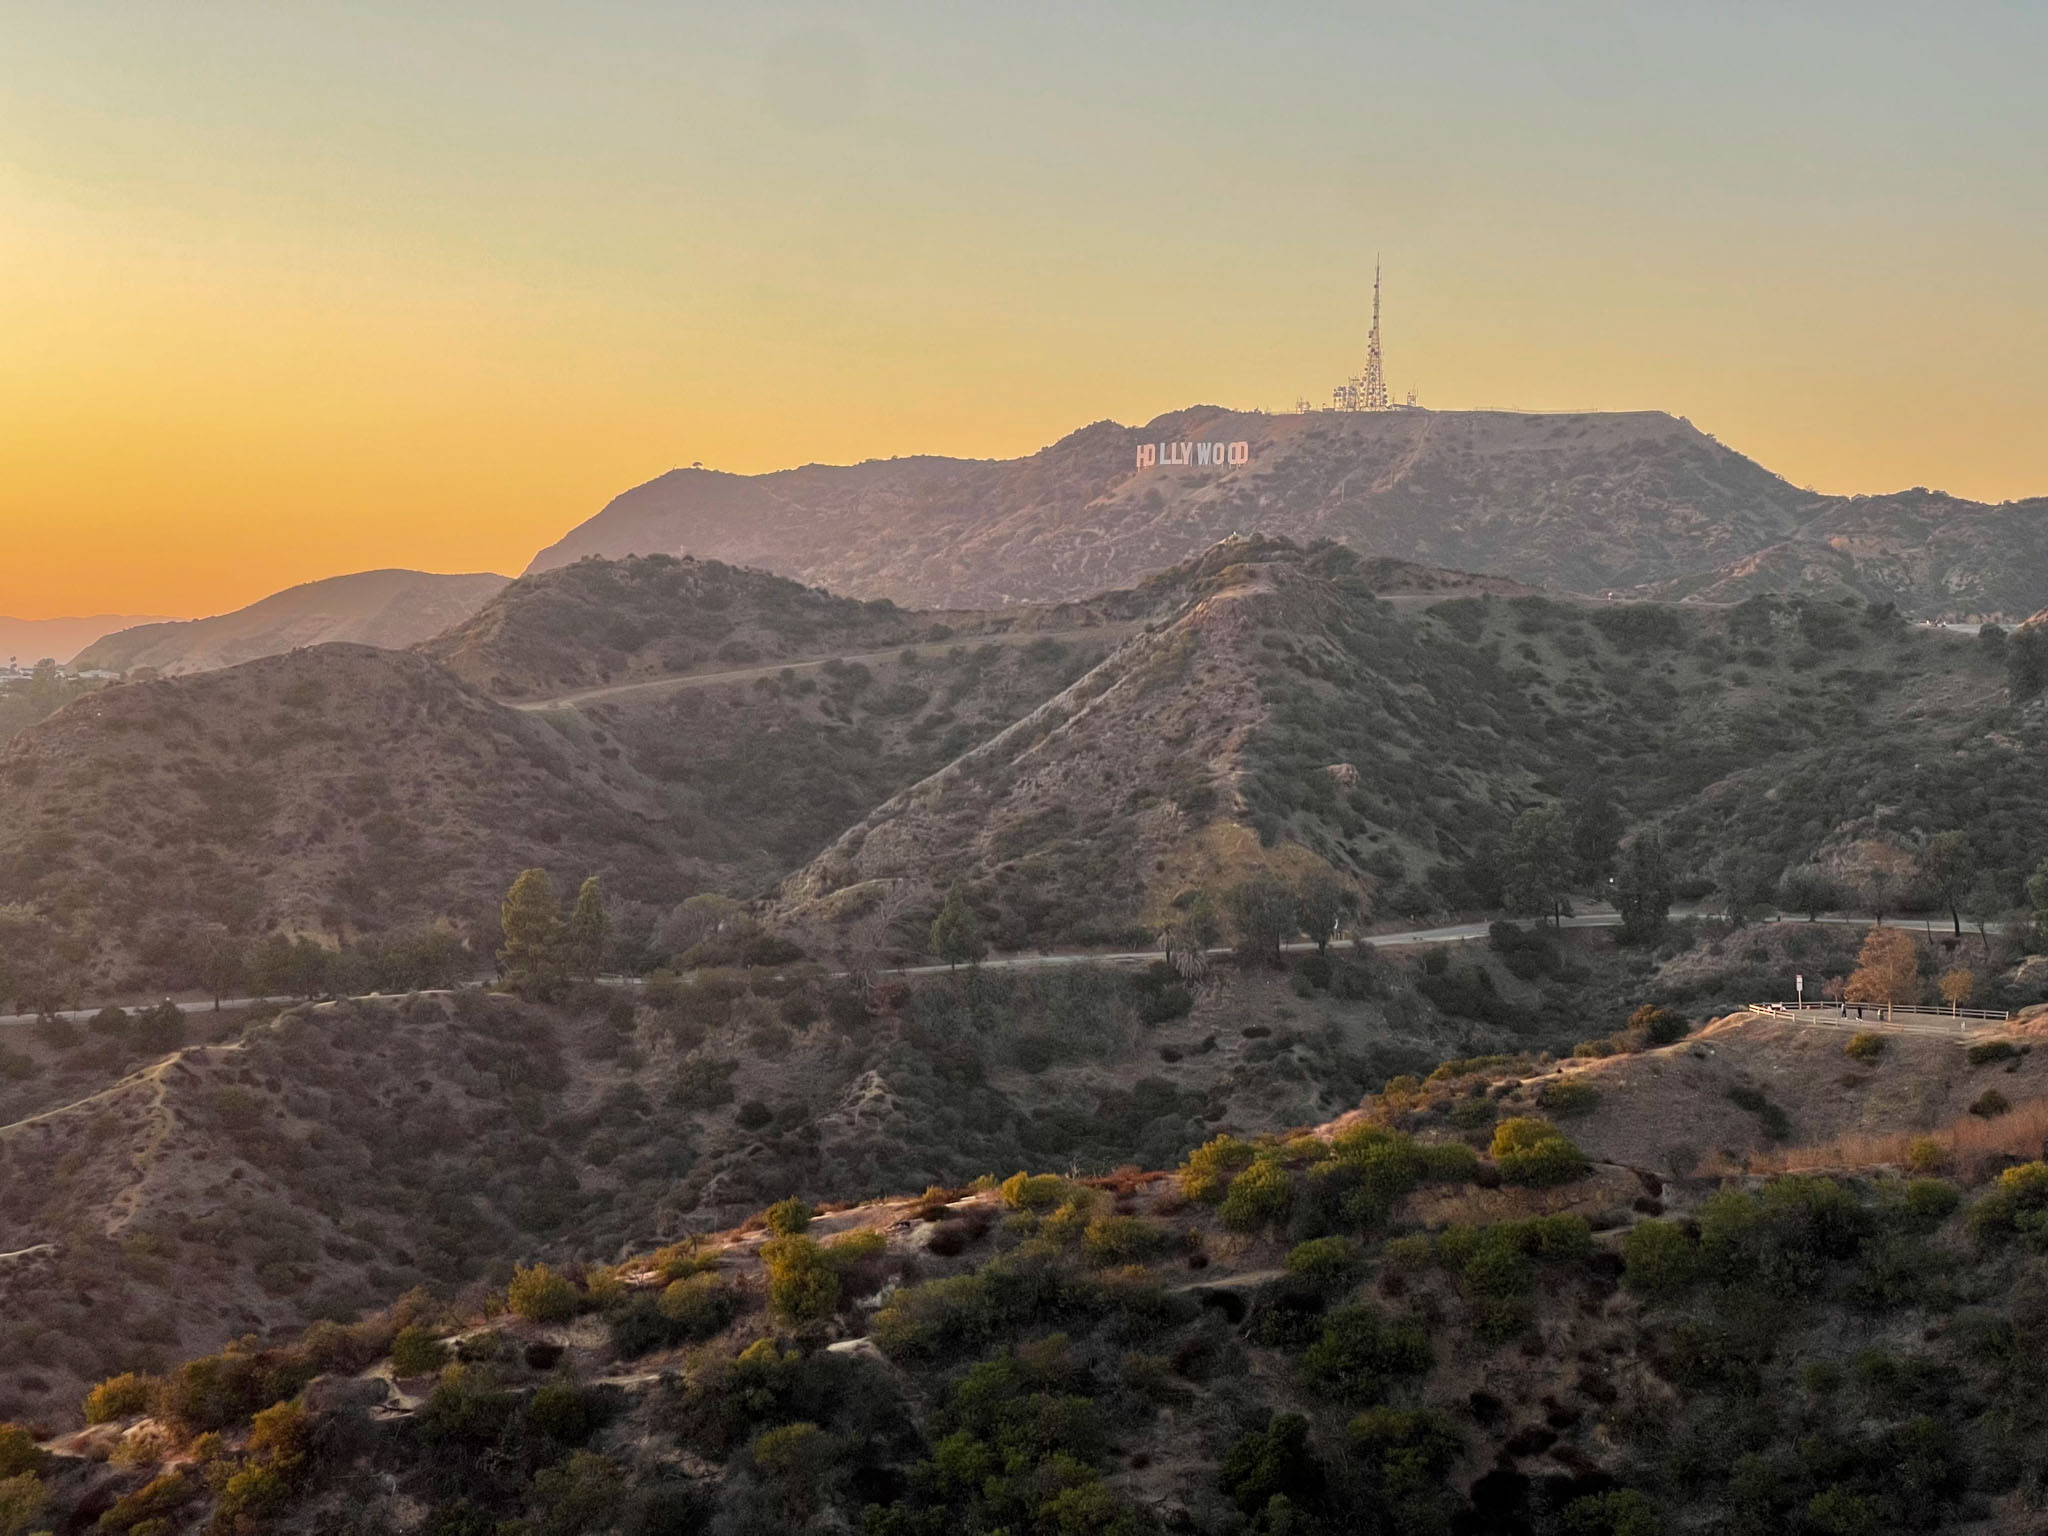 Four Hours: For an instant getaway, just head to Topanga Canyon